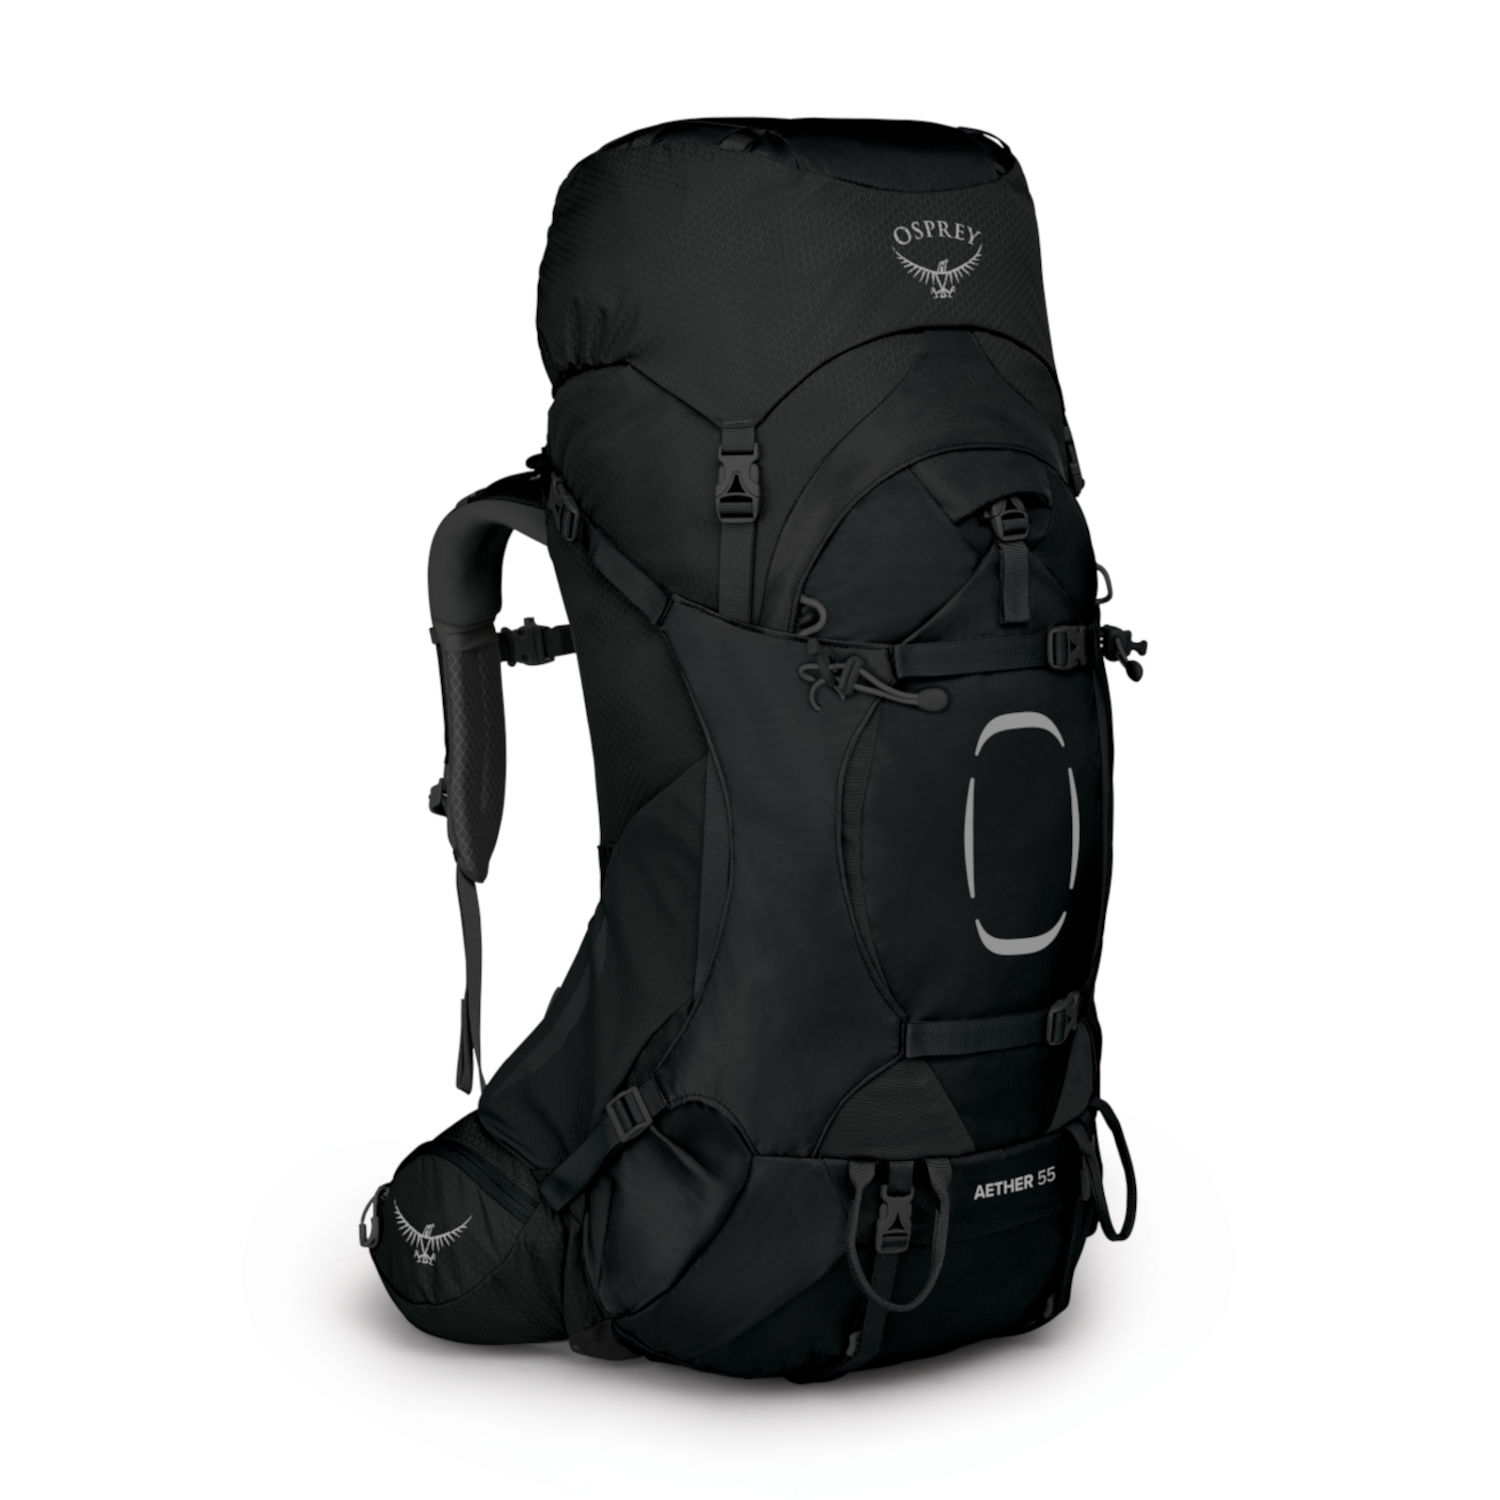 Picture of Osprey Aether 55 Backpack - Black